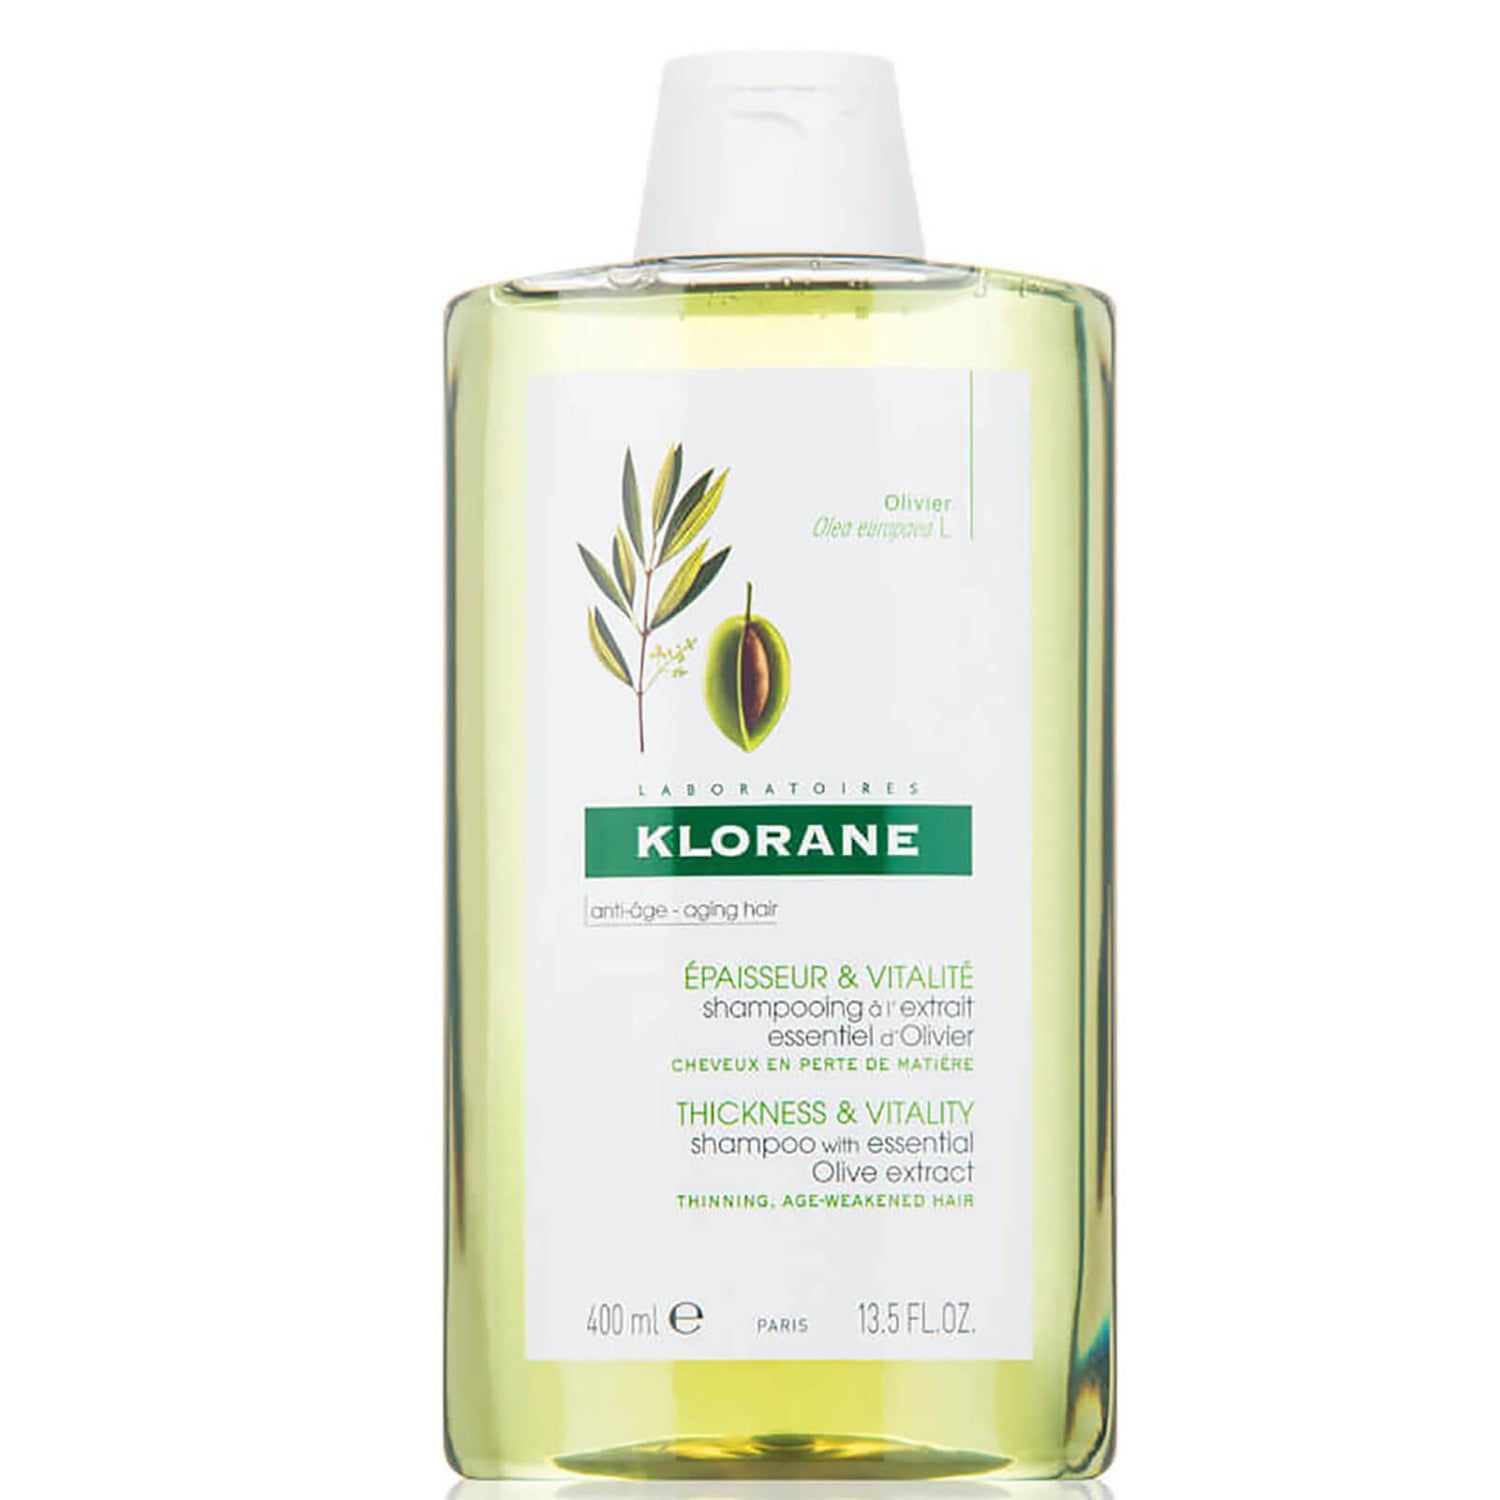 KLORANE Shampoo with Essential Olive Extract - Aging Hair (13.5 fl. oz.)